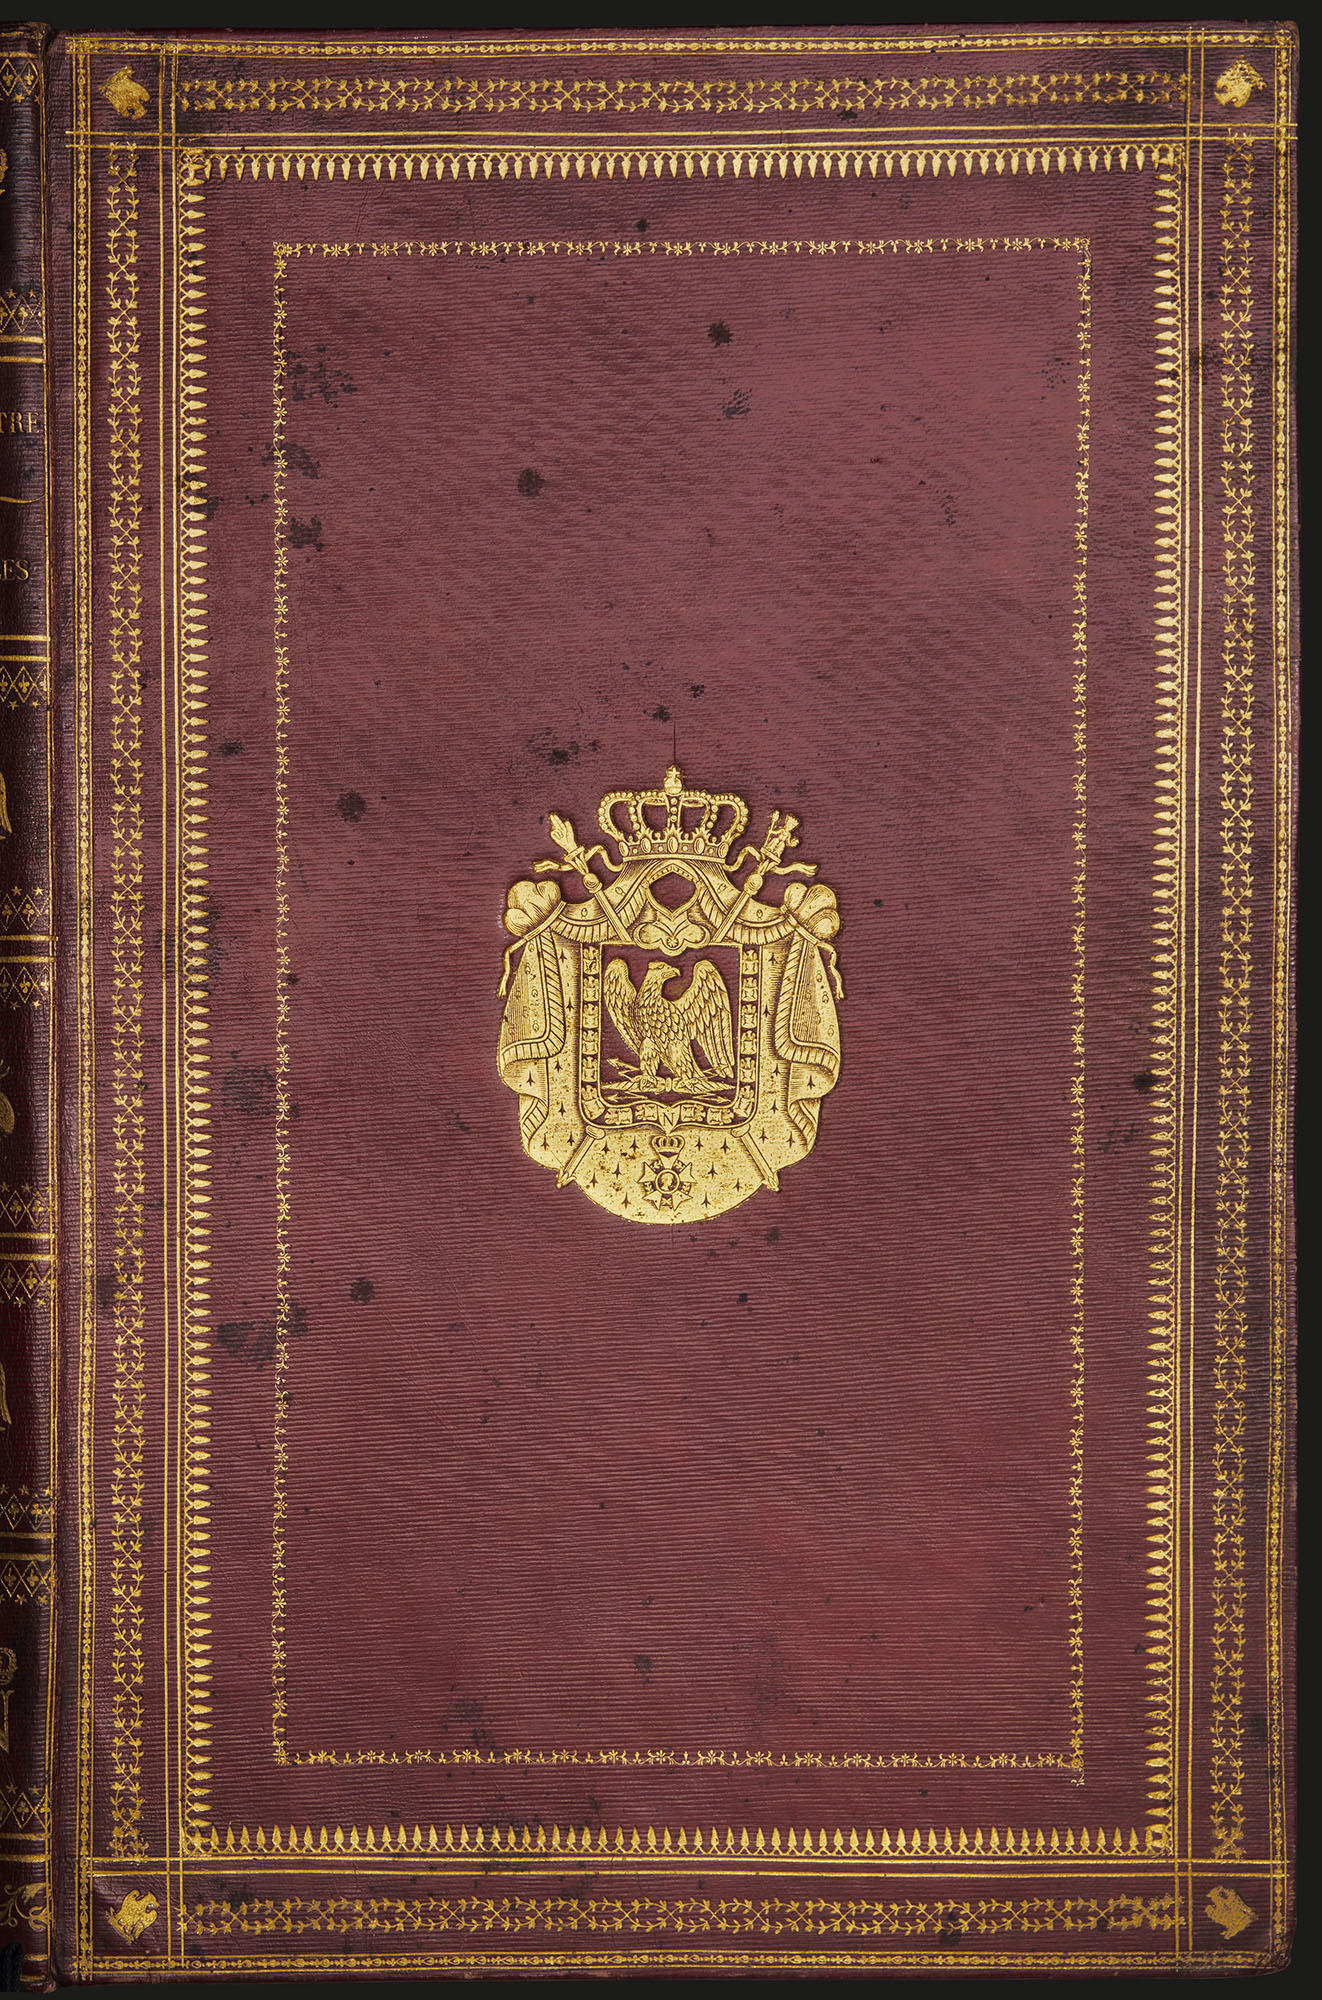 Front cover of large leather-bound book by Albert-Joseph-Ulpein Hennet with Napoleonic gilded coat of arms at center.